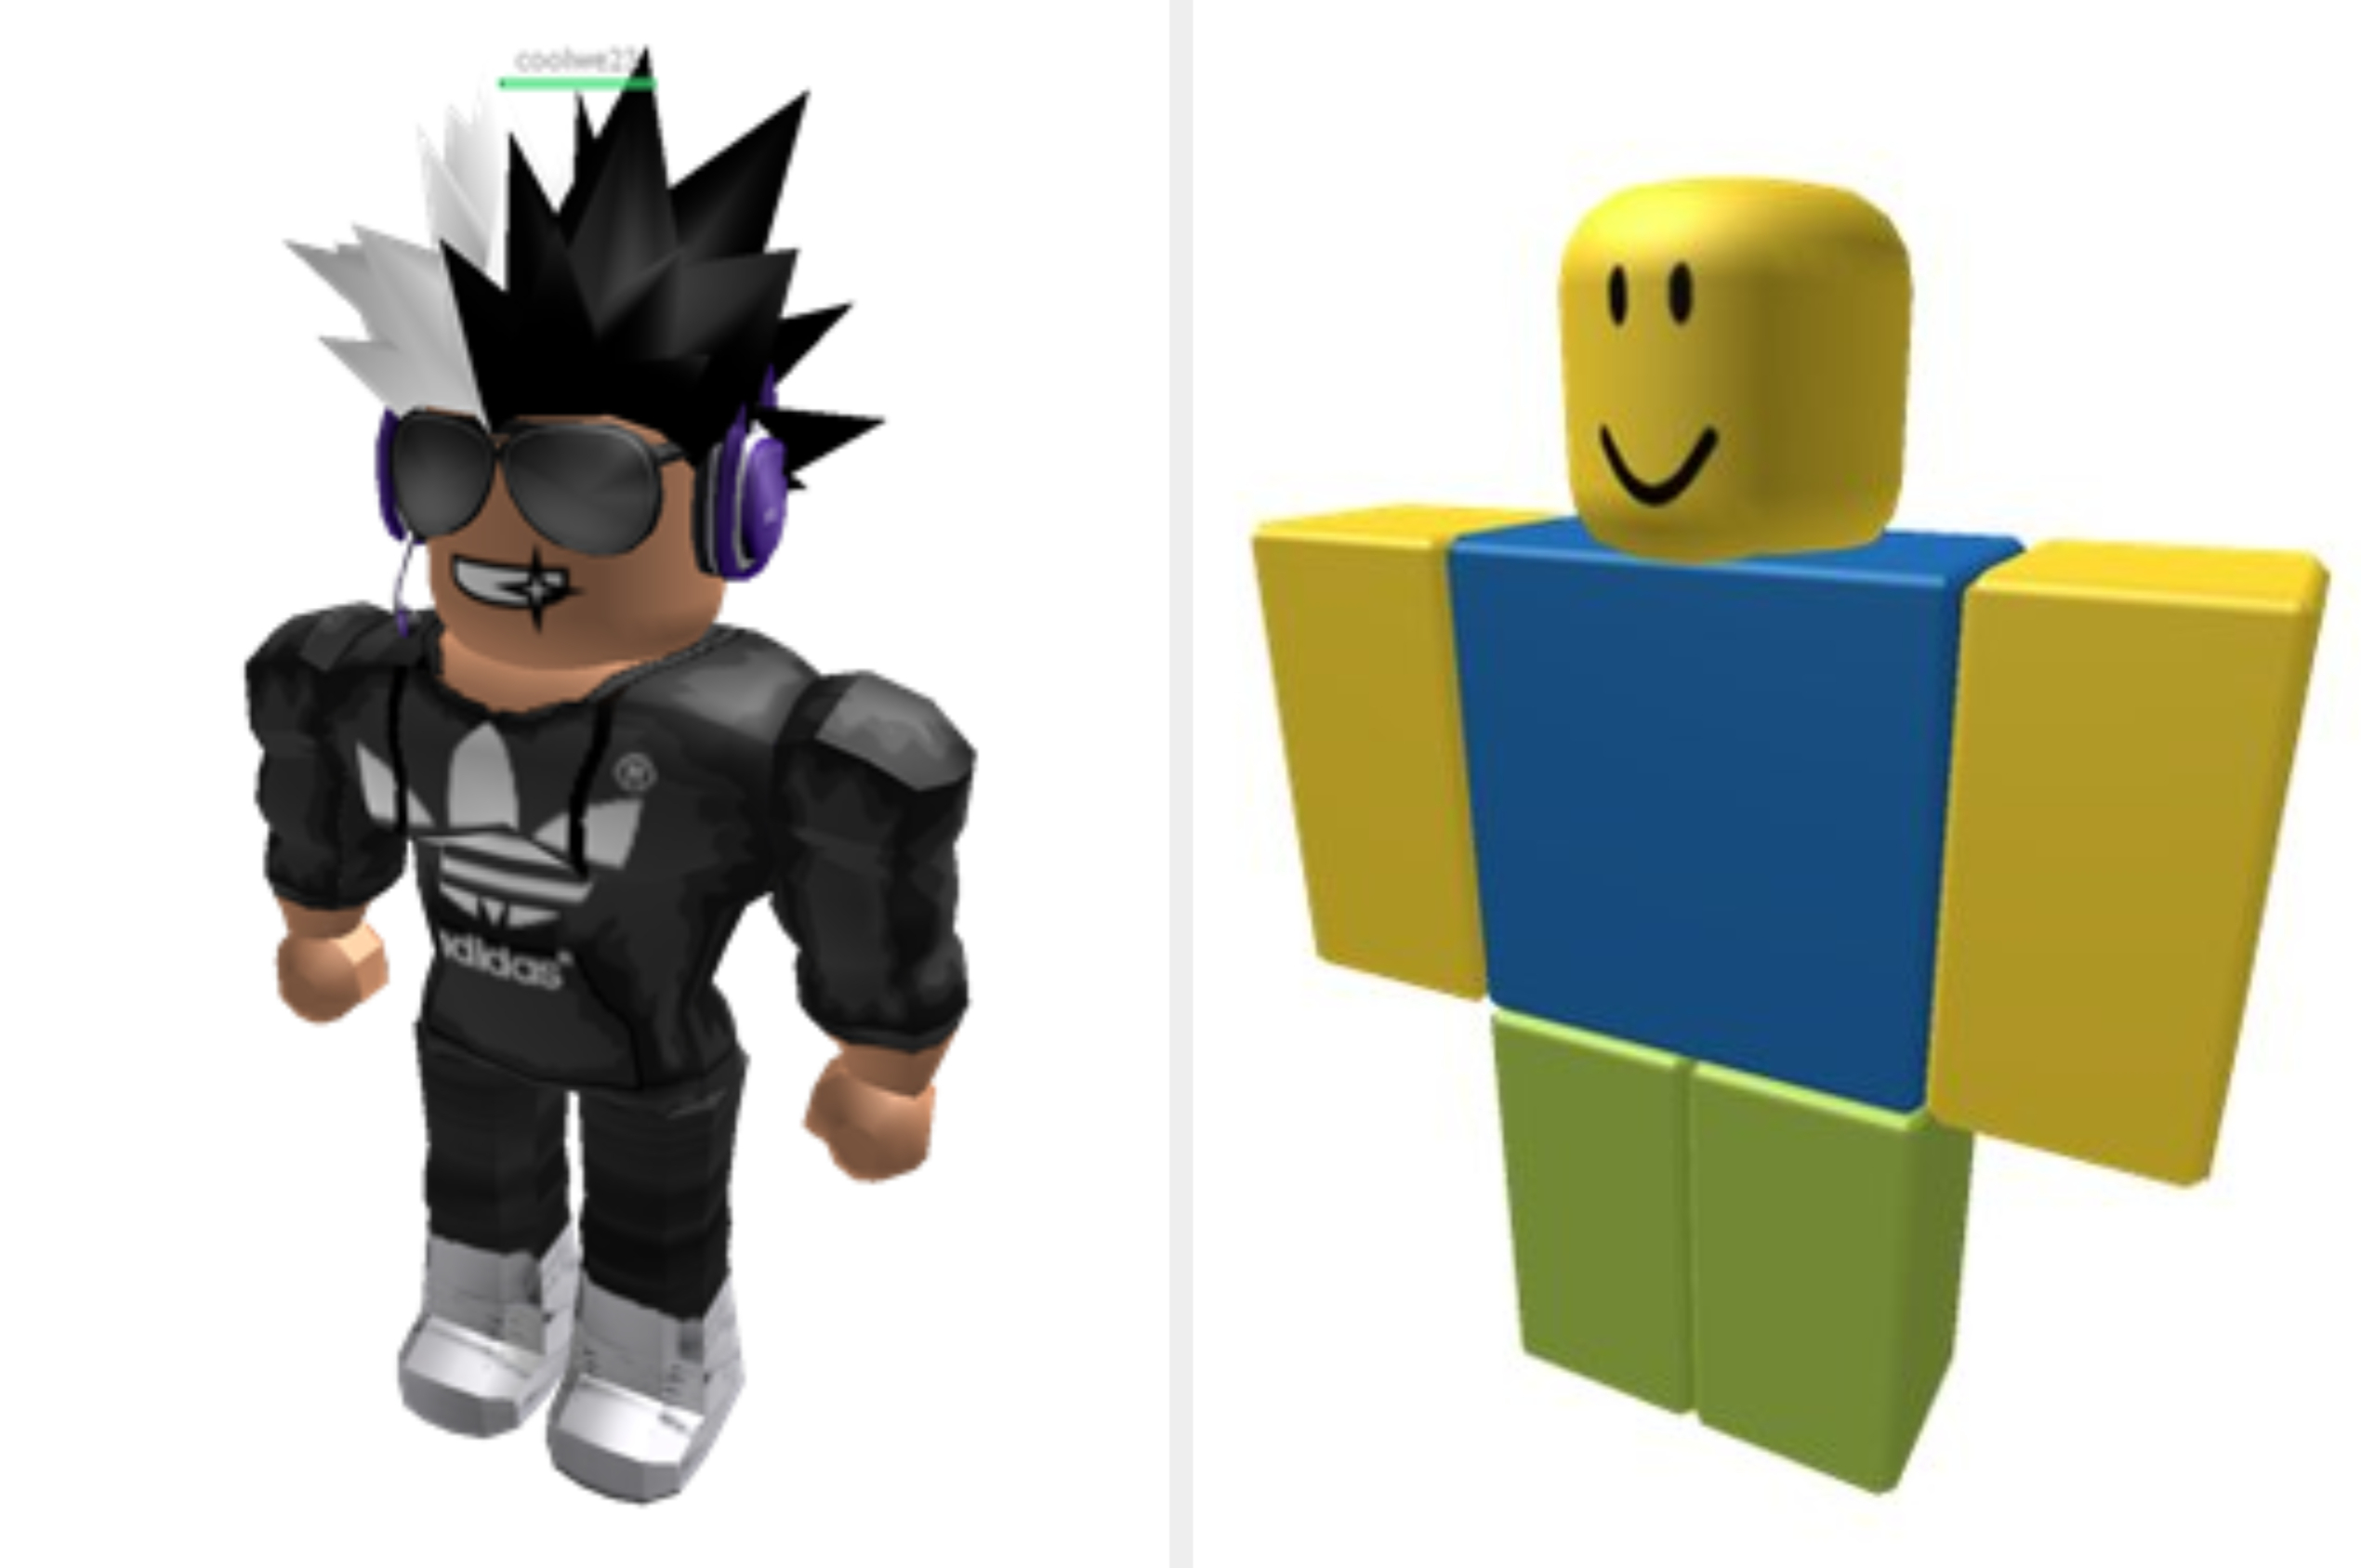 Roblox Quiz What Kind Of Player Are You - roblox quiz